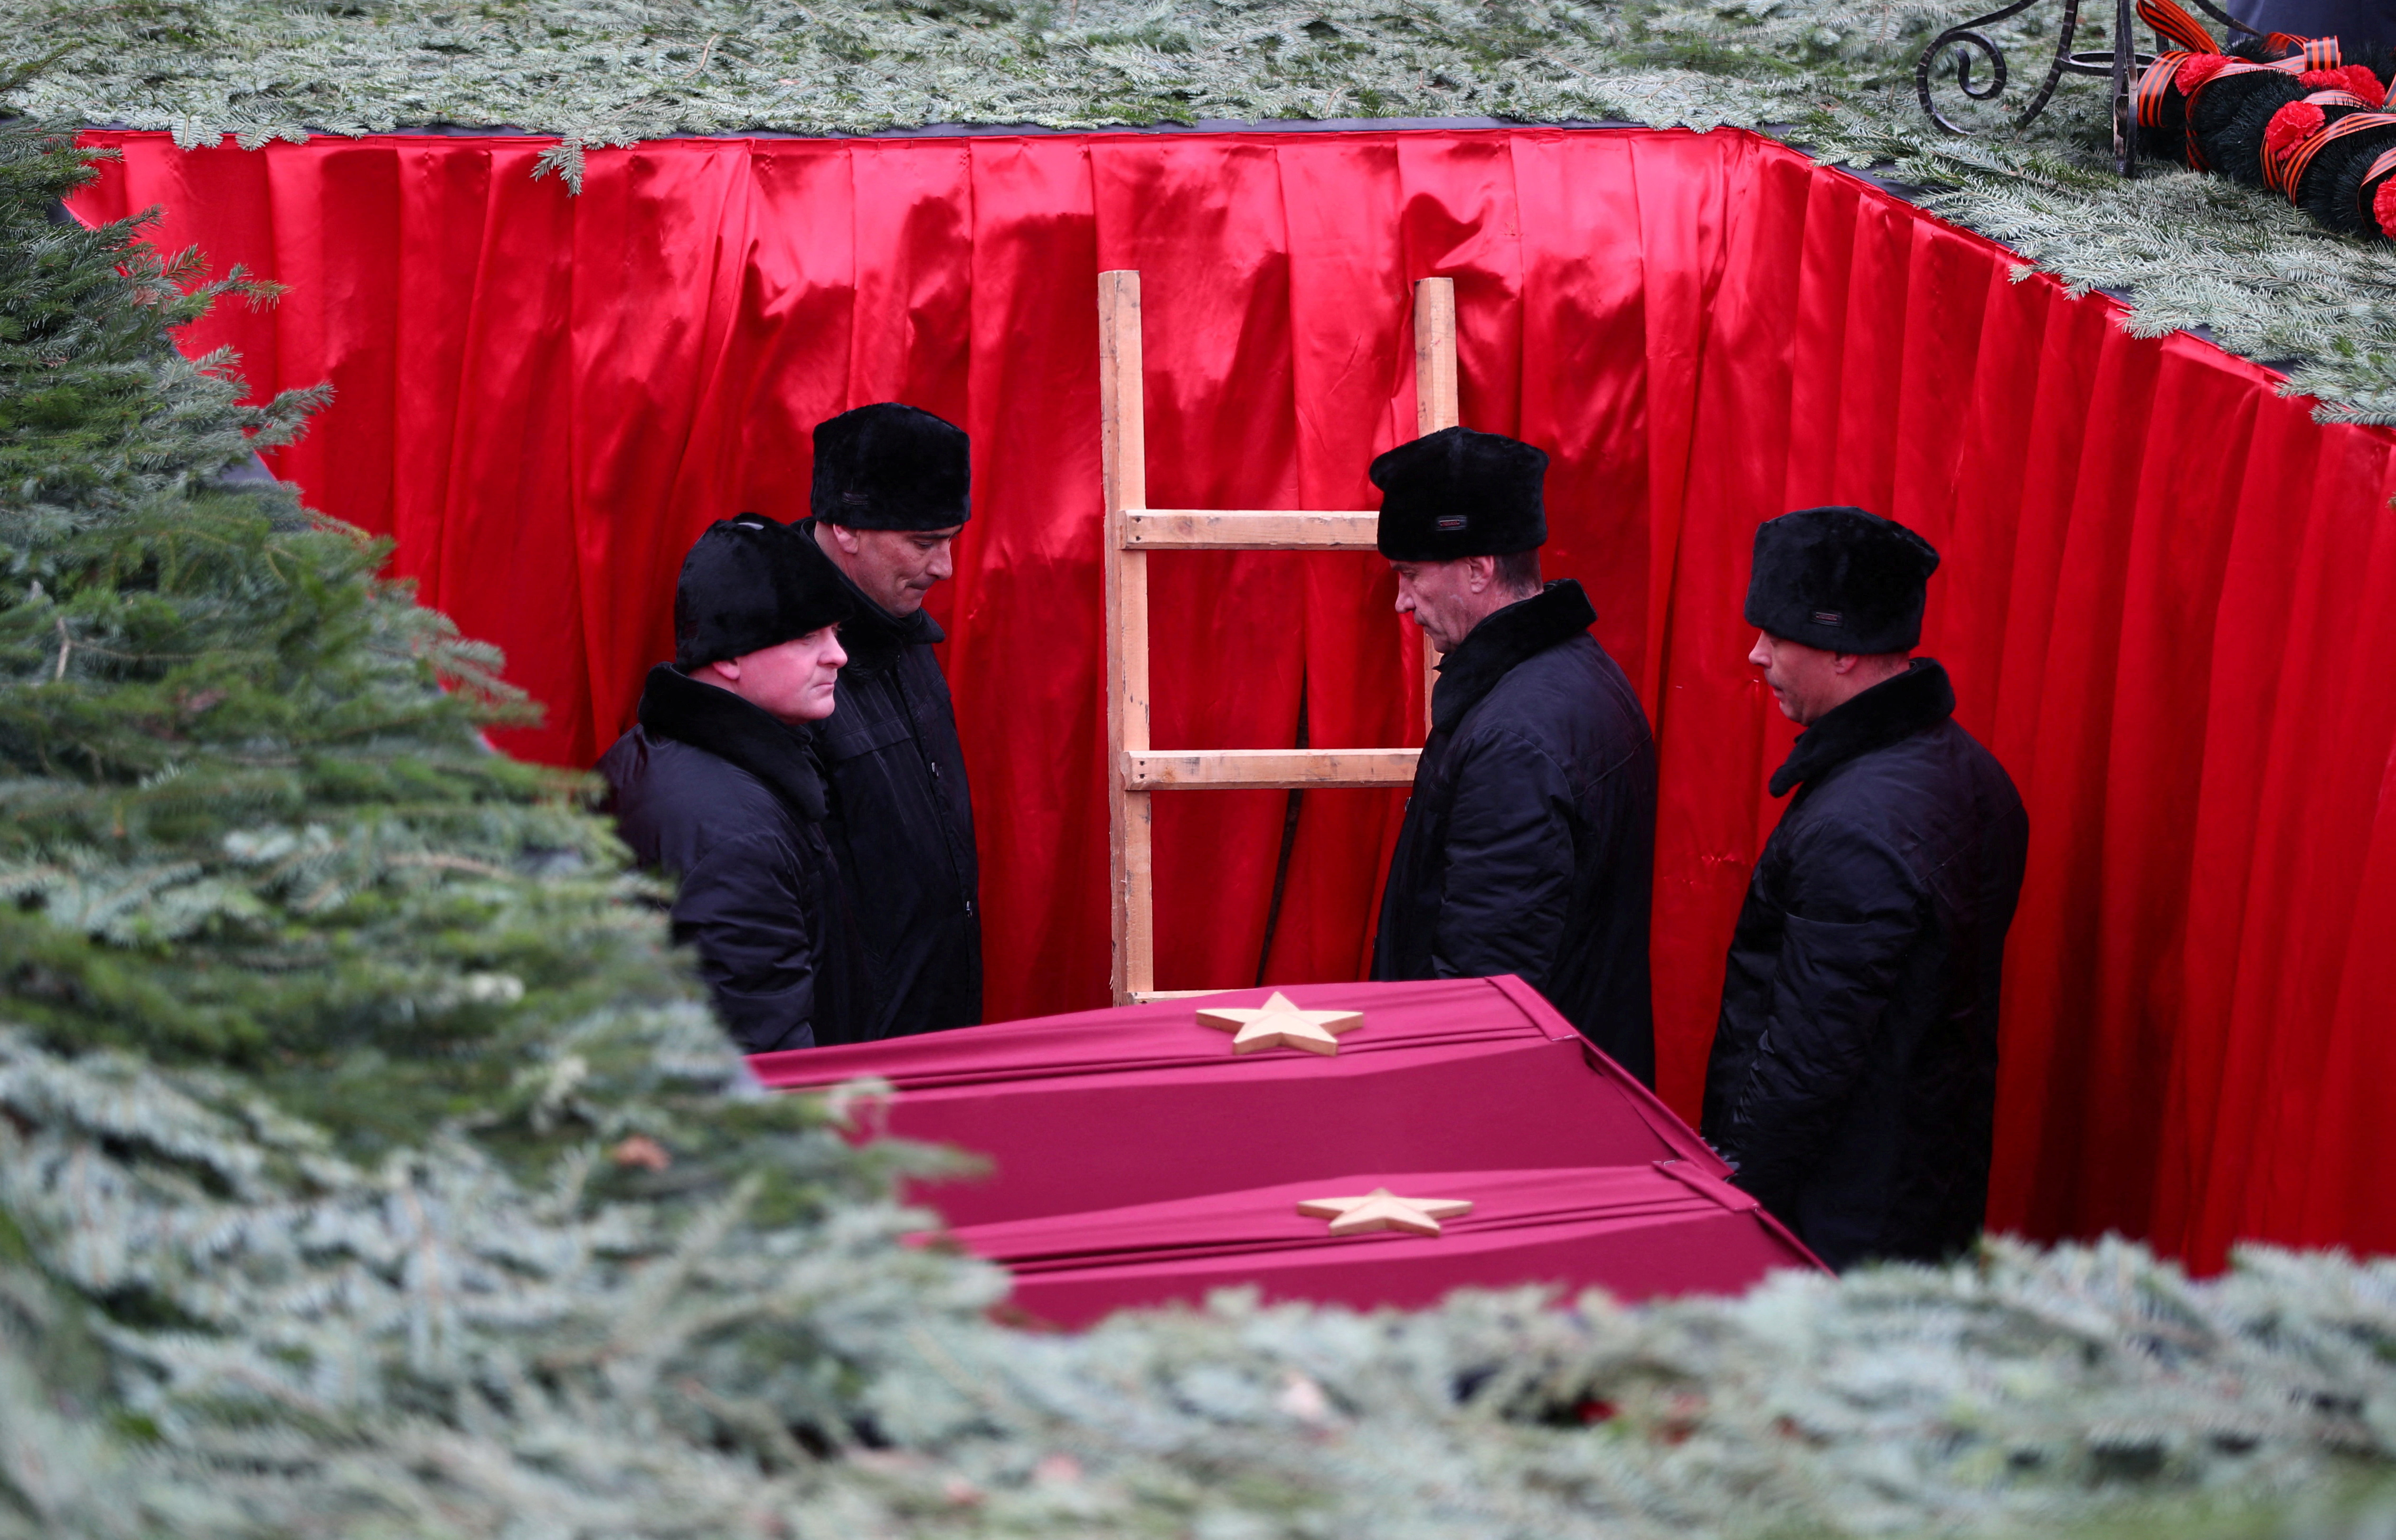 Participants attend a ceremony to rebury the remains of Red Army soldiers killed during World War Two in Volgograd region